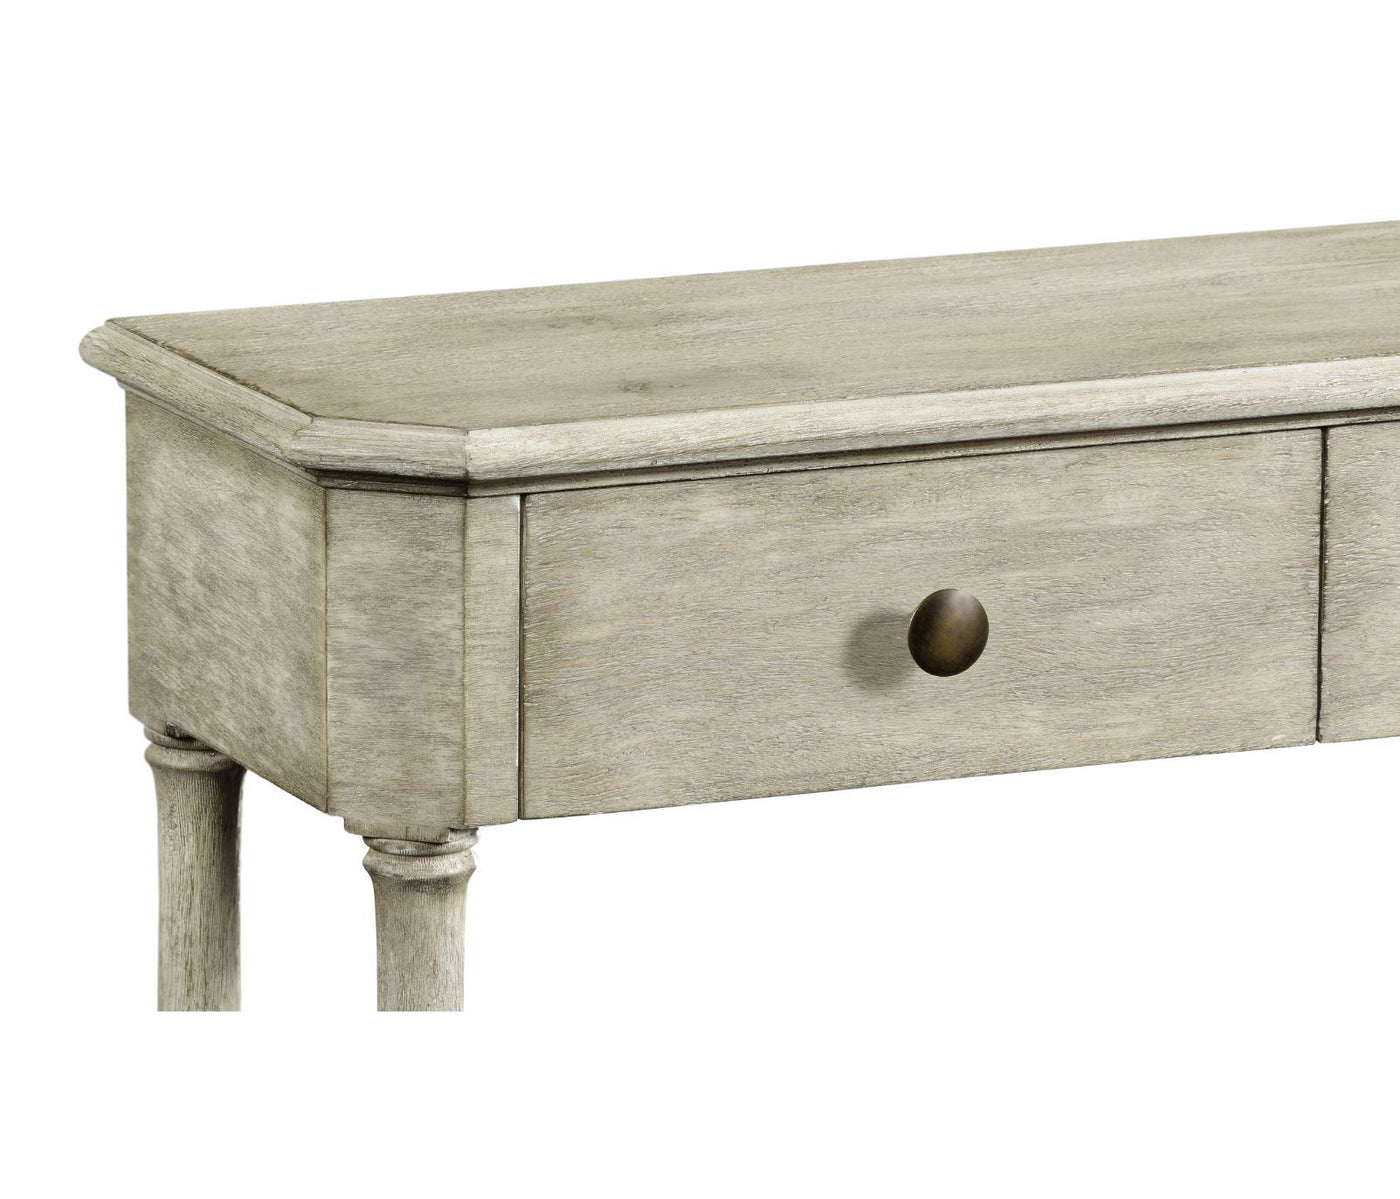 Jonathan Charles Large Narrow Console Table Victorian in Rustic Grey